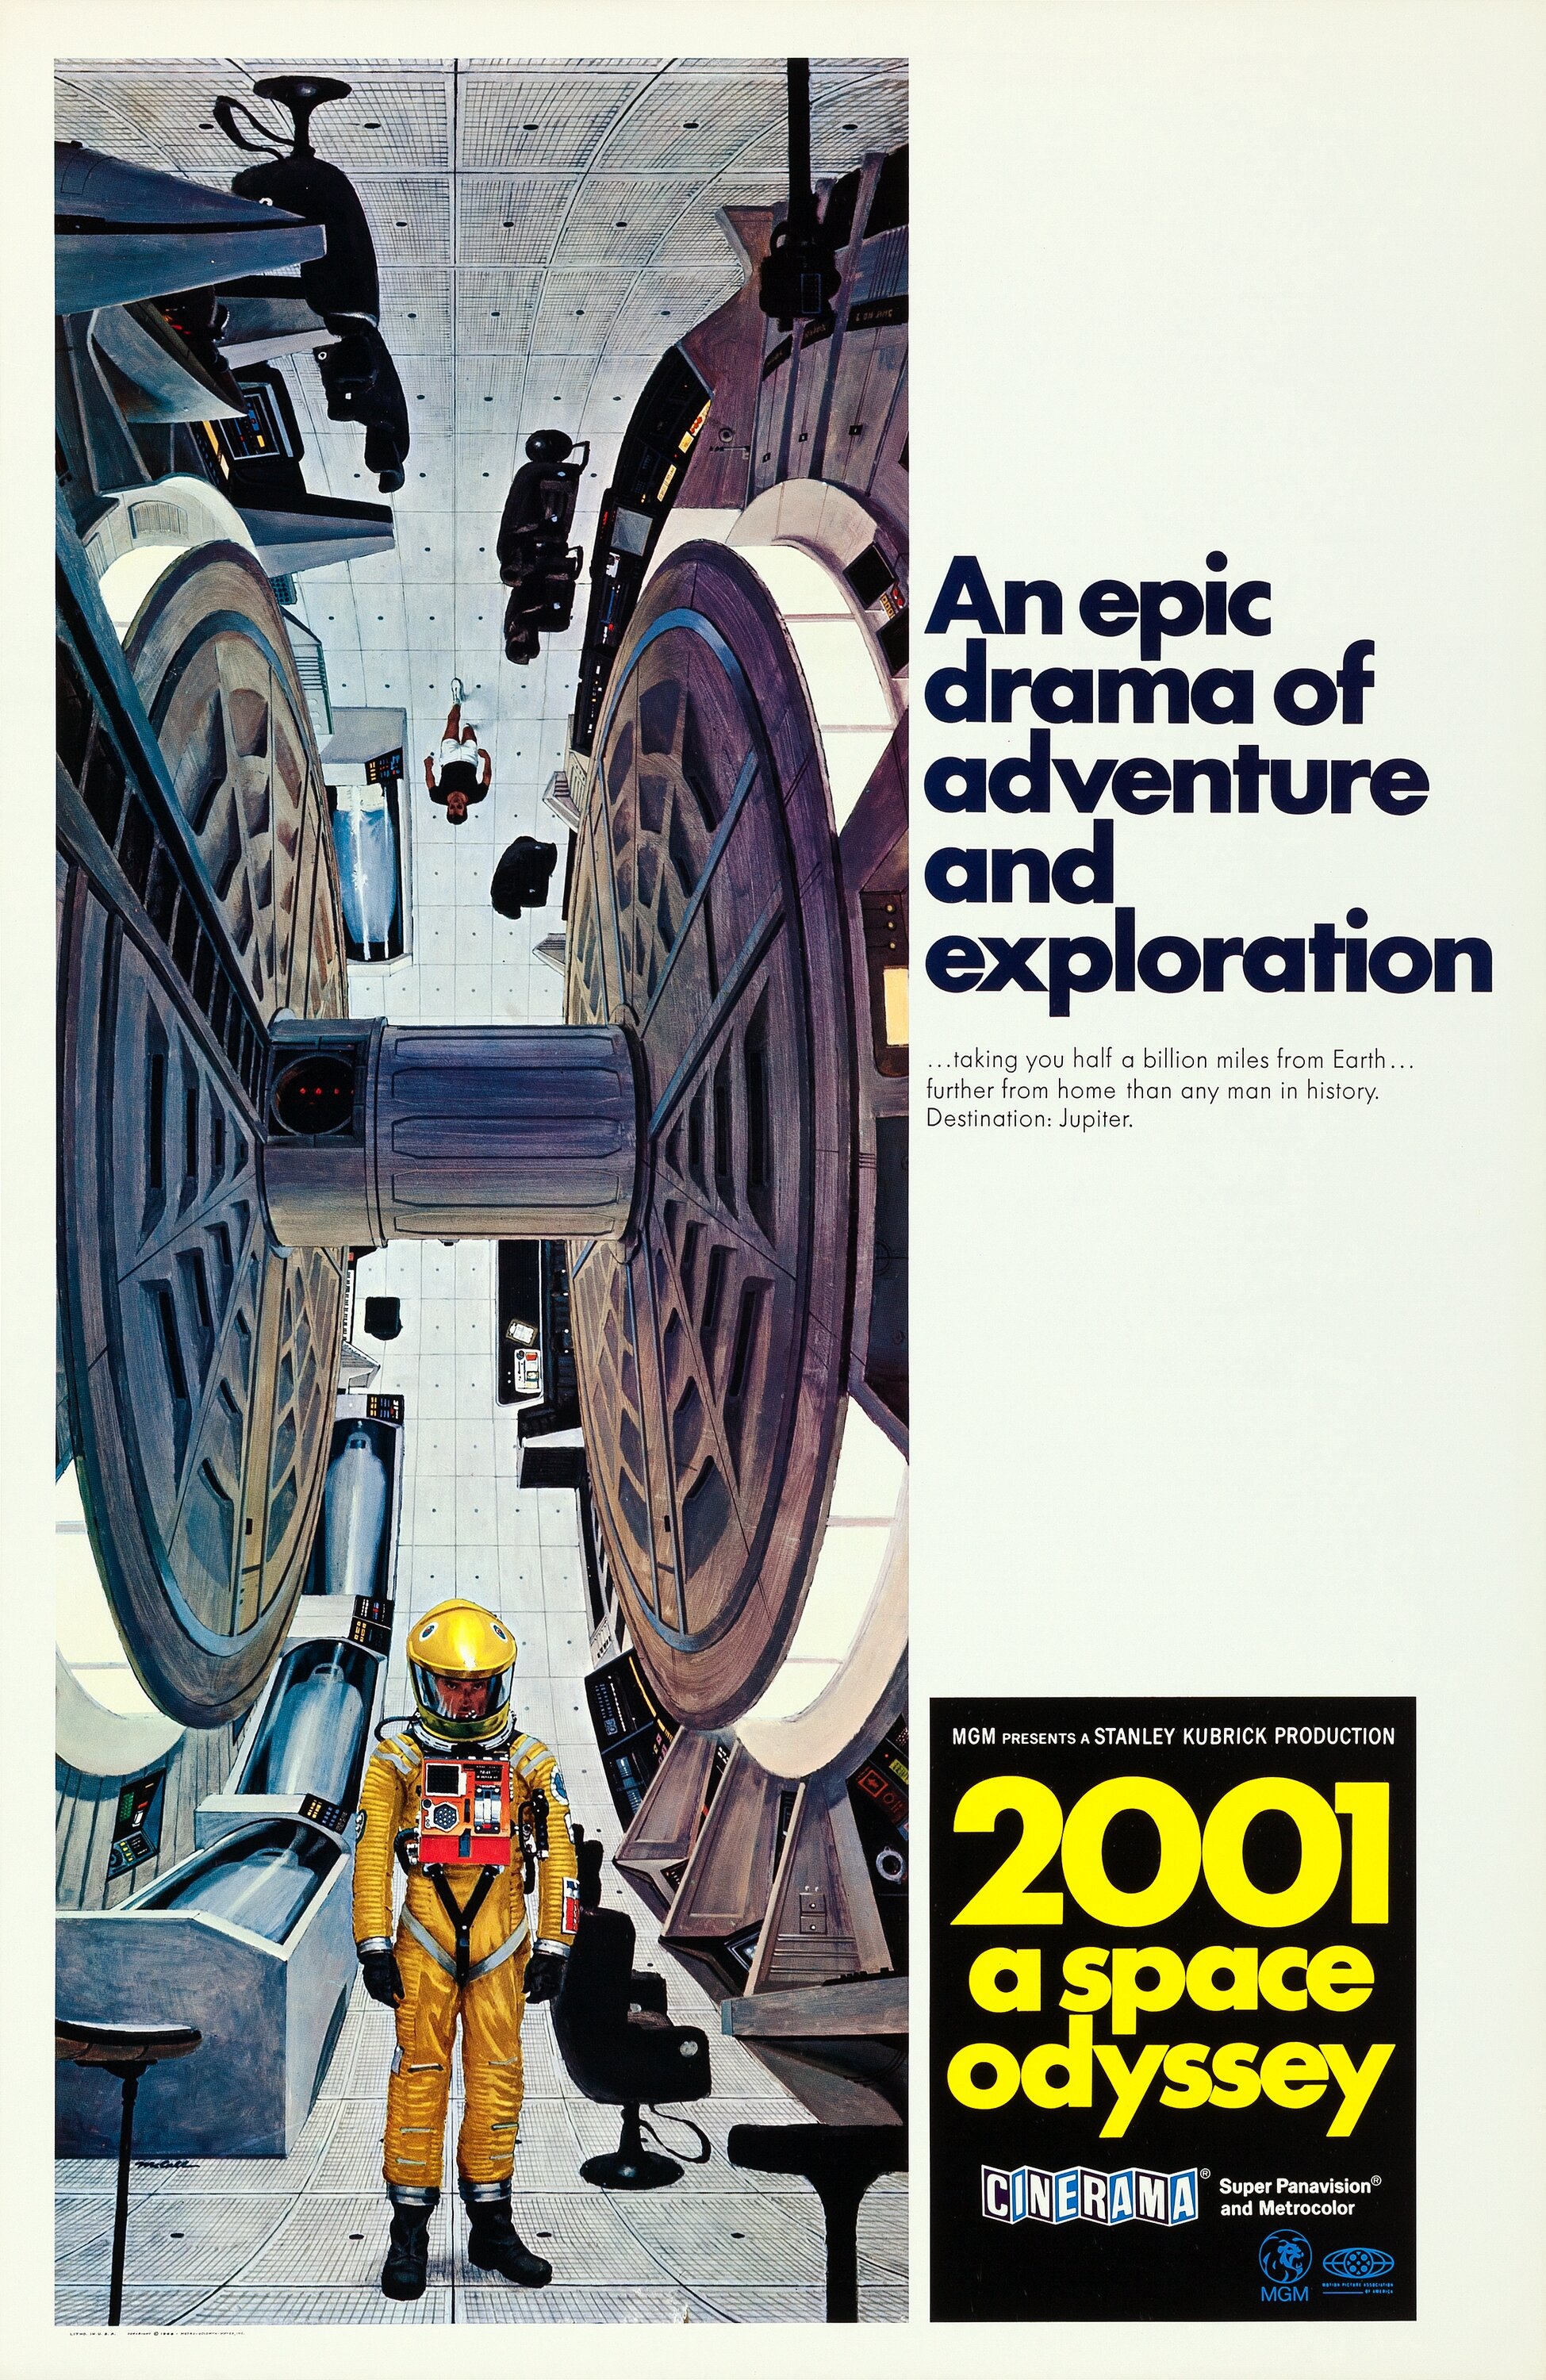 2001 A Space Odyssey Mgm 1968 Cinerama One Sheet 27 X 41 Lot 86326 Heritage Auctions 5707